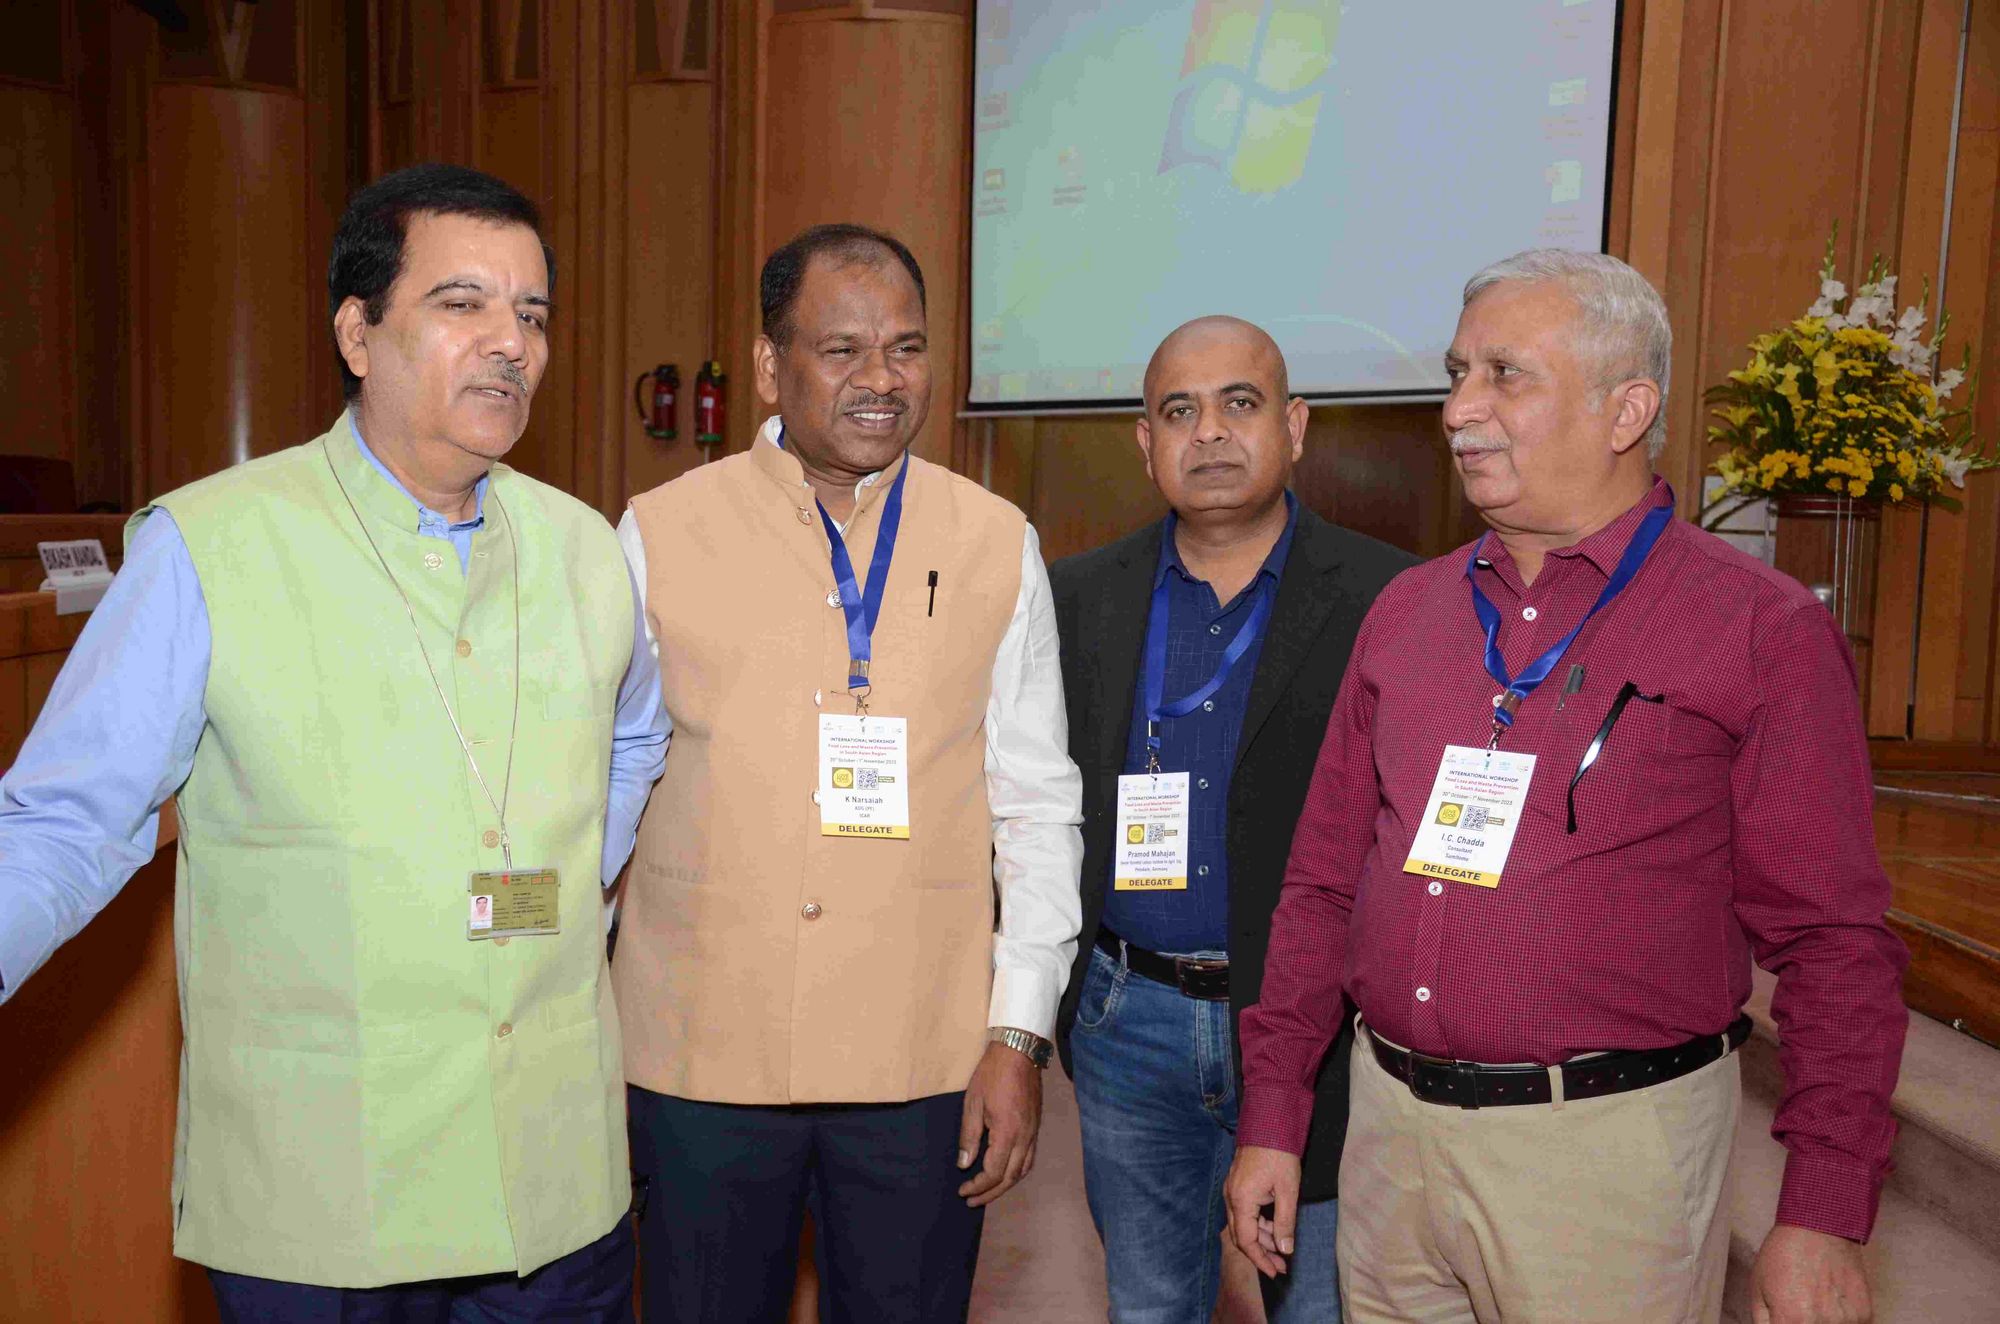 Dr SN Jha, Deputy Director General, Dr Kairam Narsaiah, Assistant Director General, both Indian Council of Agricultural Research, together with Dr Pramod Mahajan, Leibniz Institute Germany, and Mr IC Chadda, consultant.